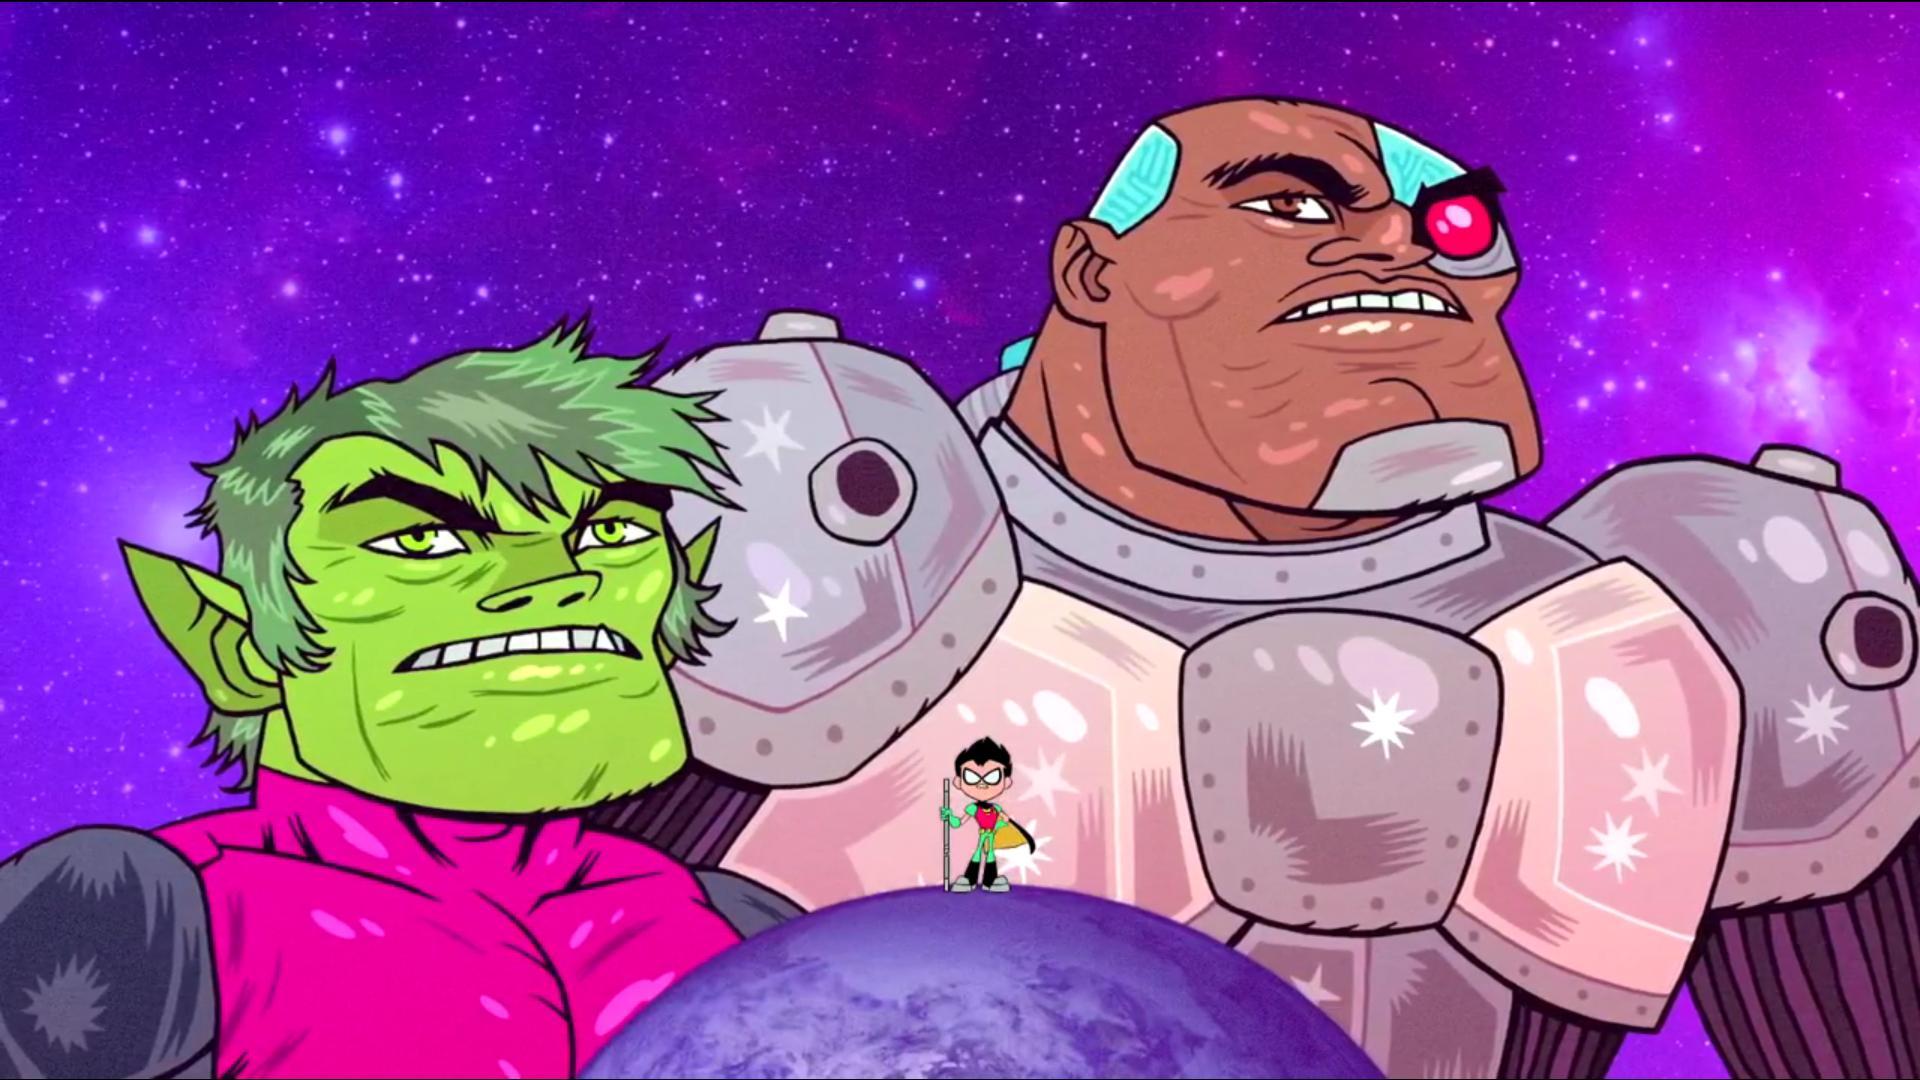 My favourite scene from Teen Titans Go